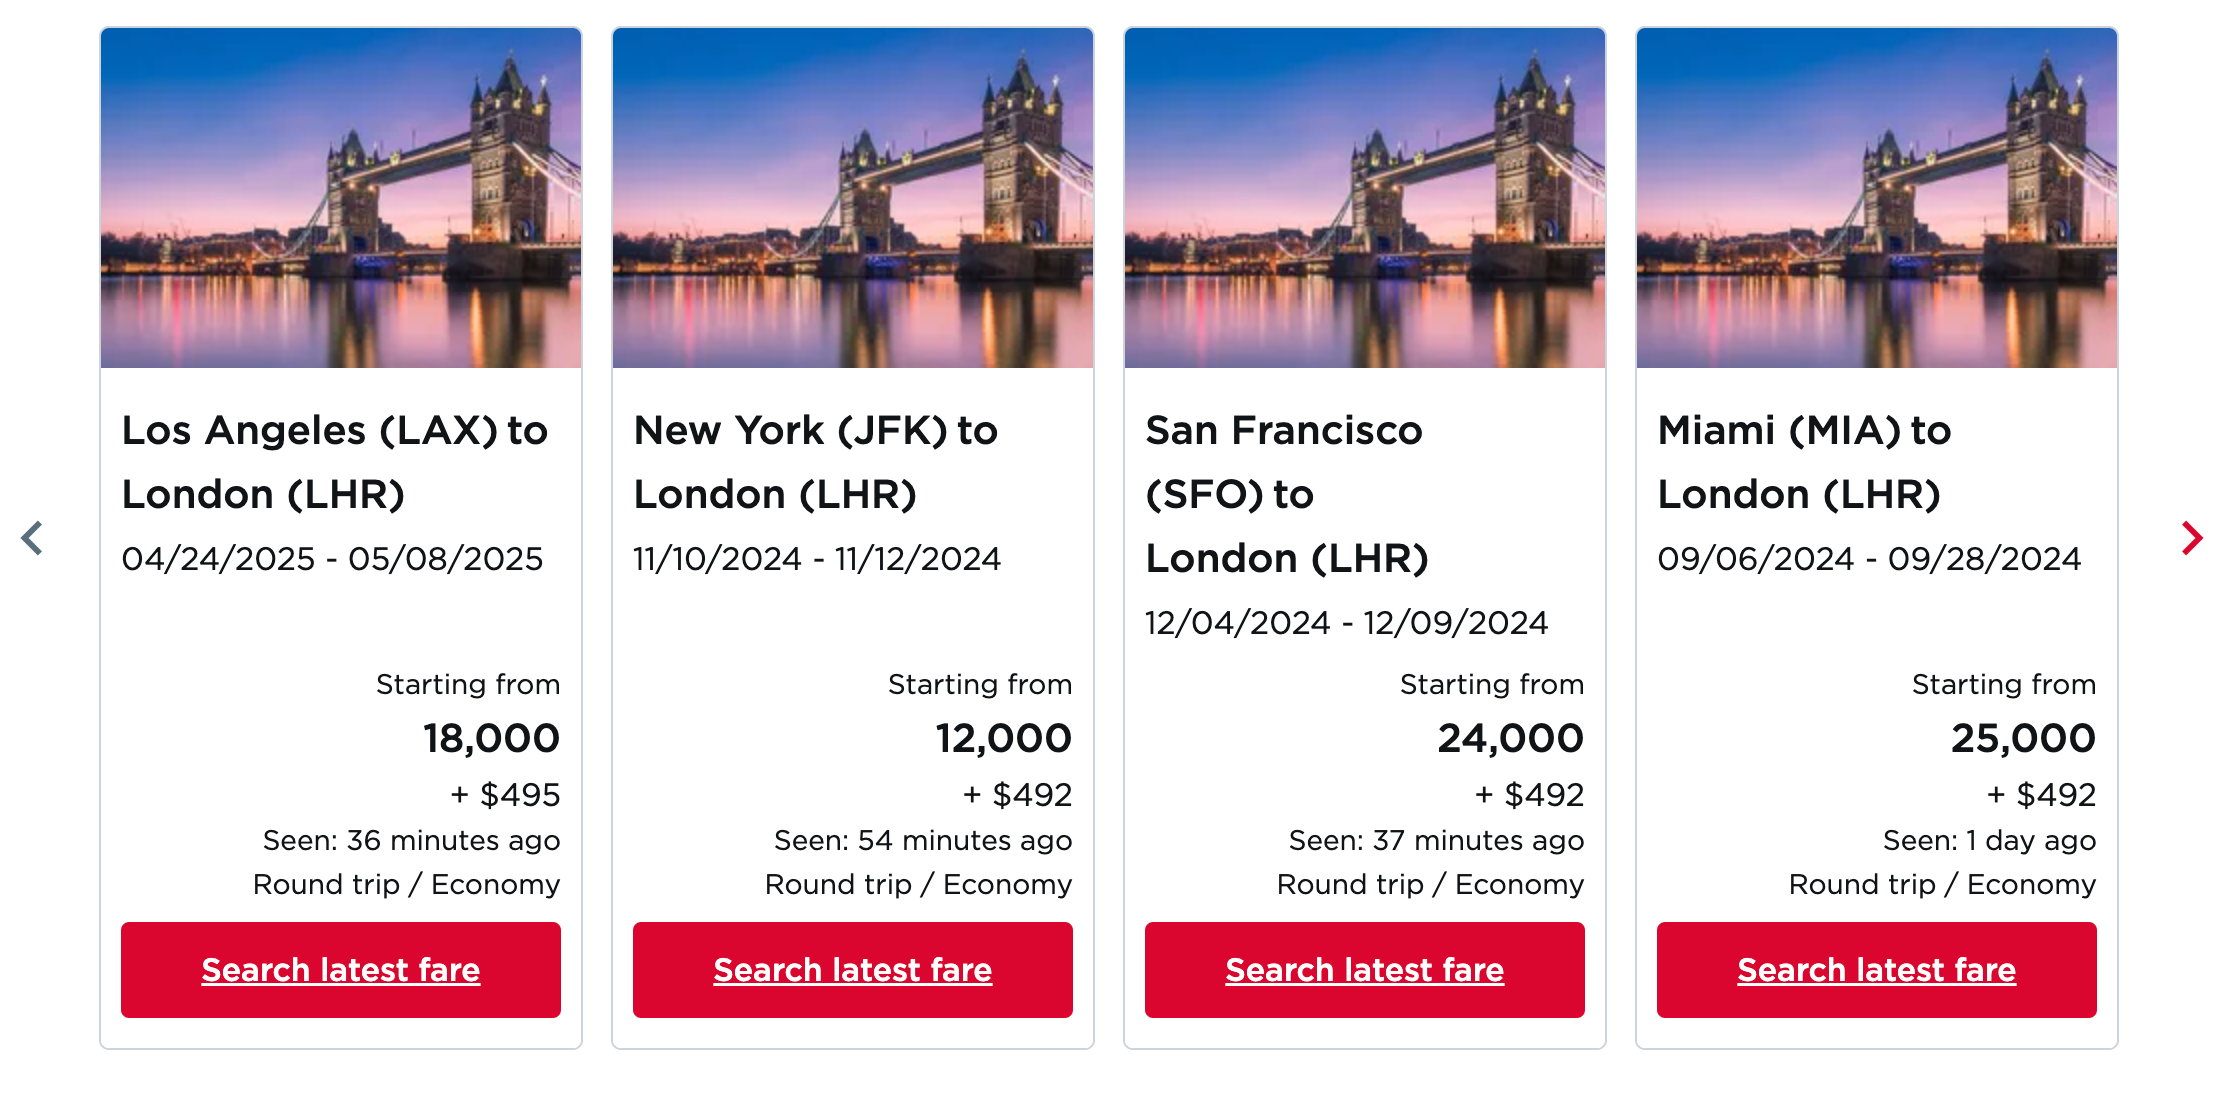 travel voucher terms and conditions virgin atlantic